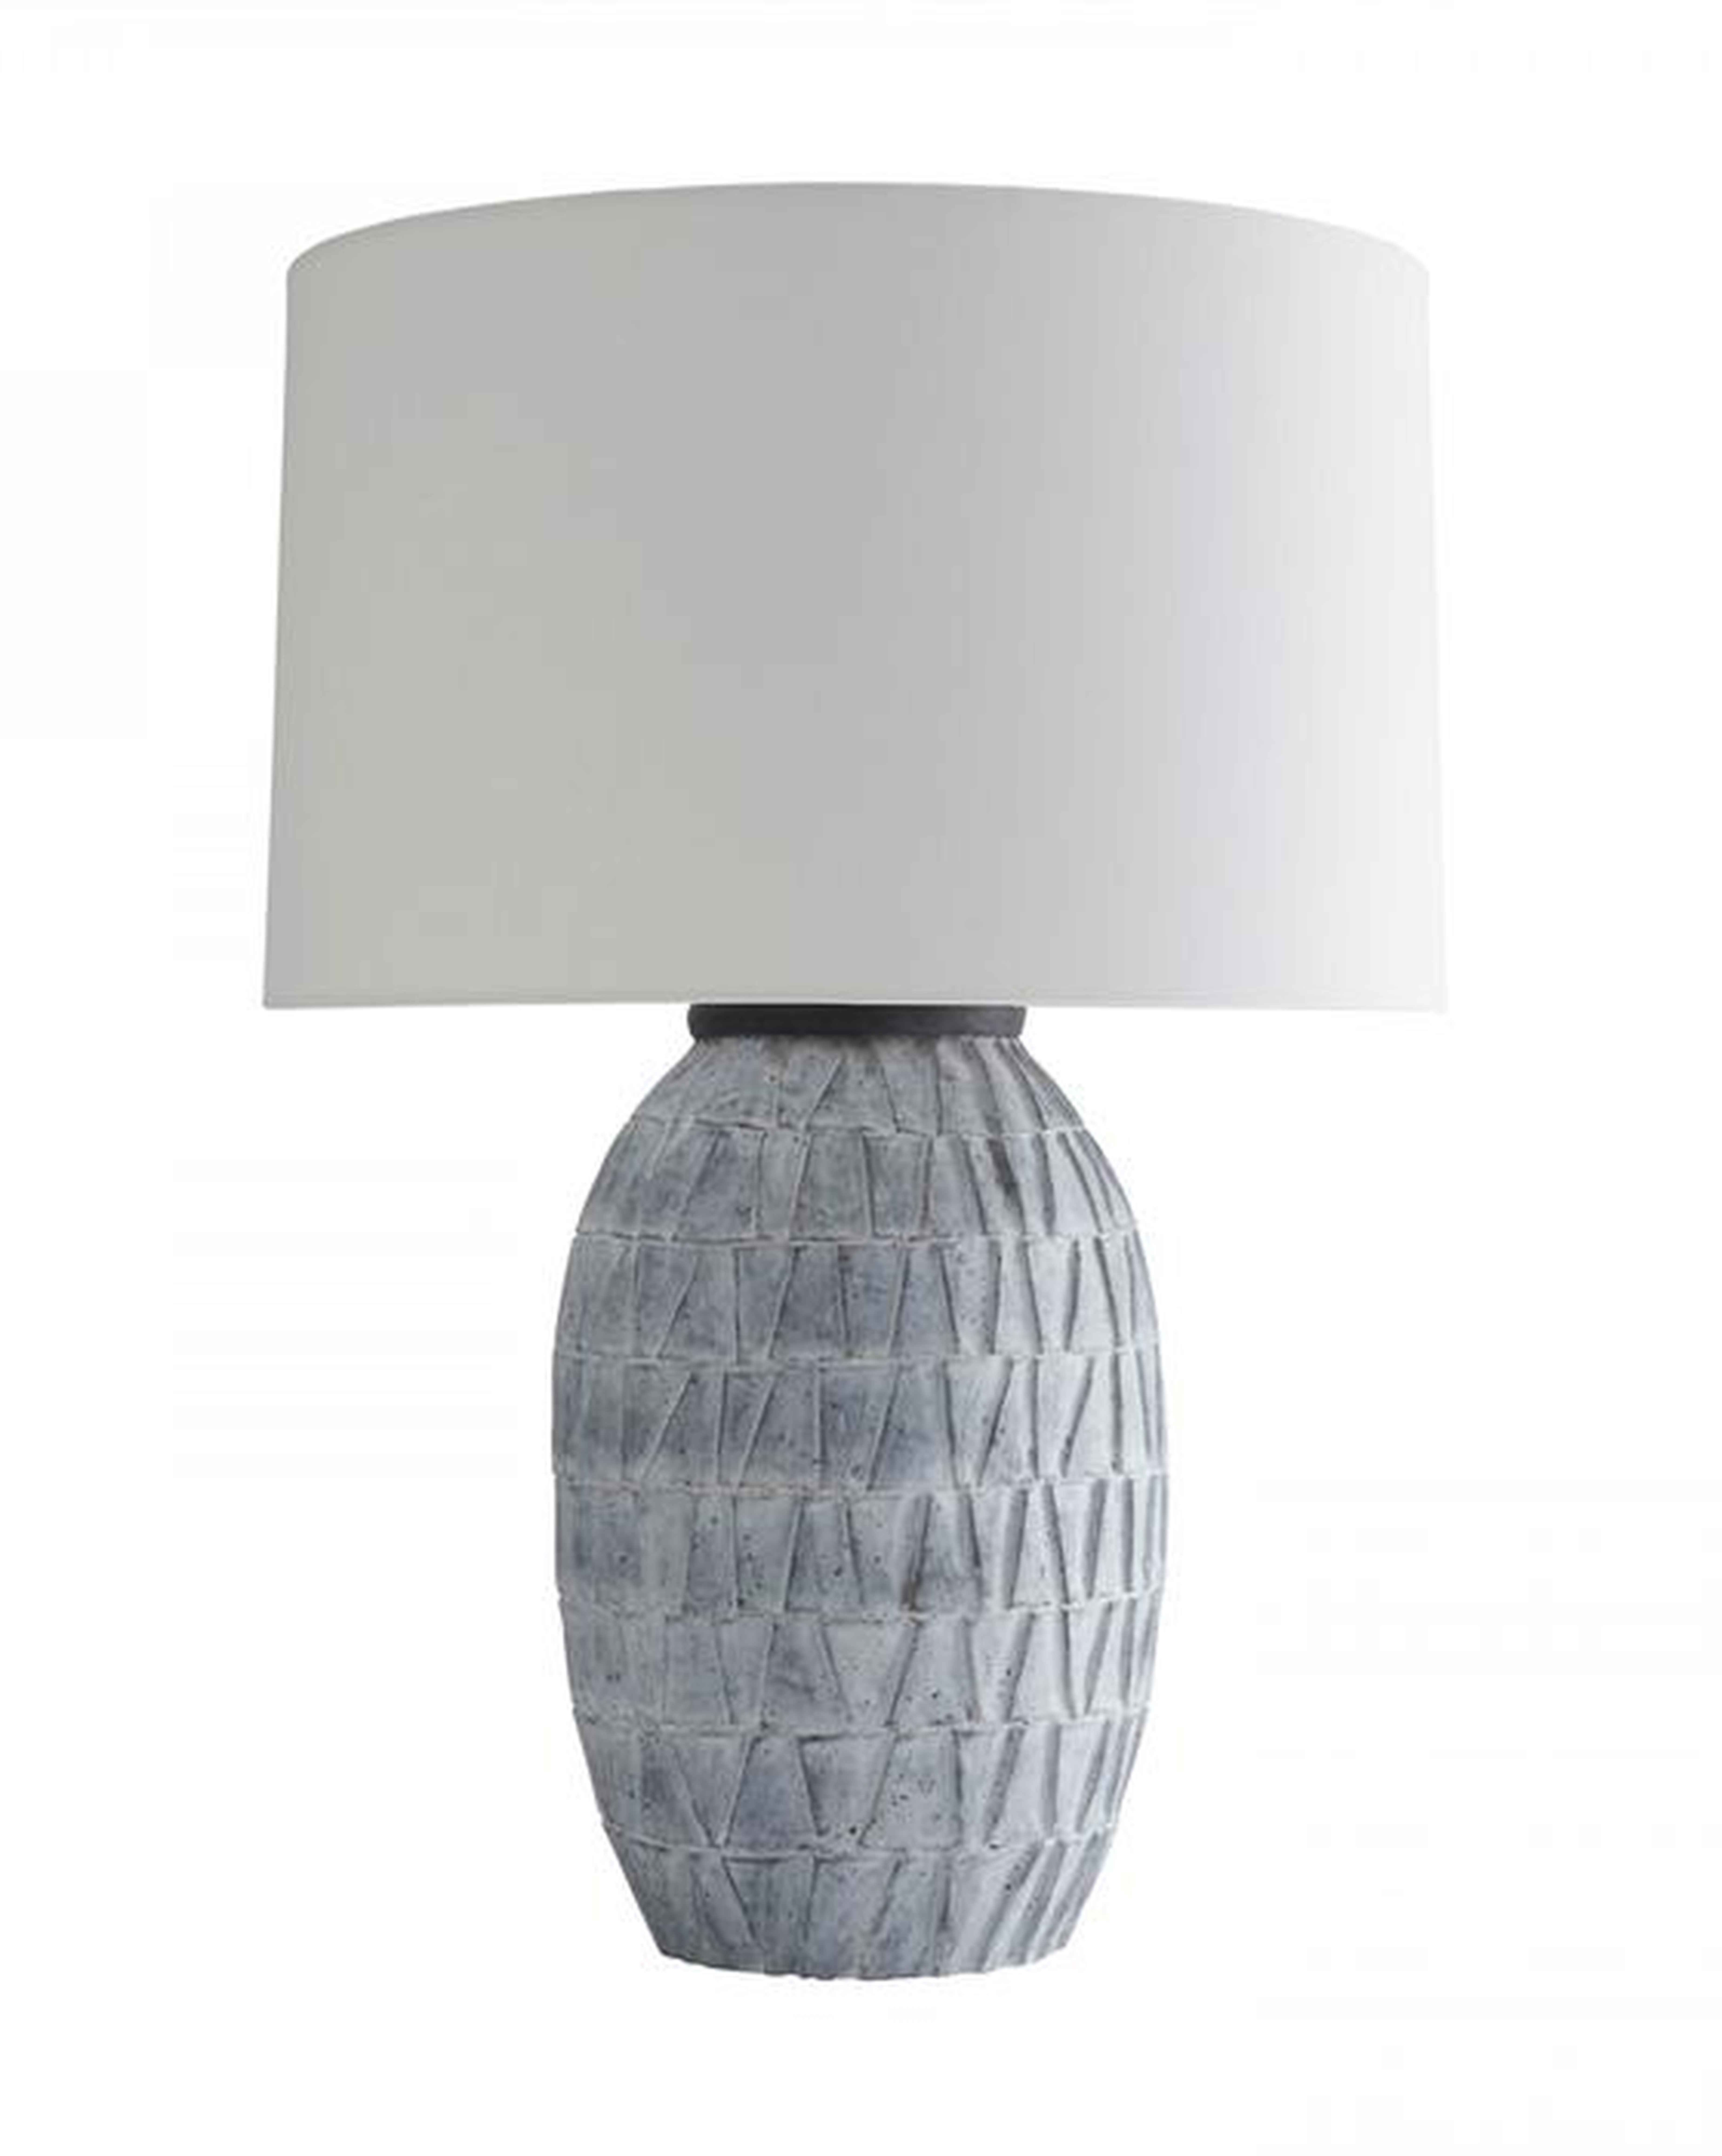 Archibold Table Lamp - McGee & Co.